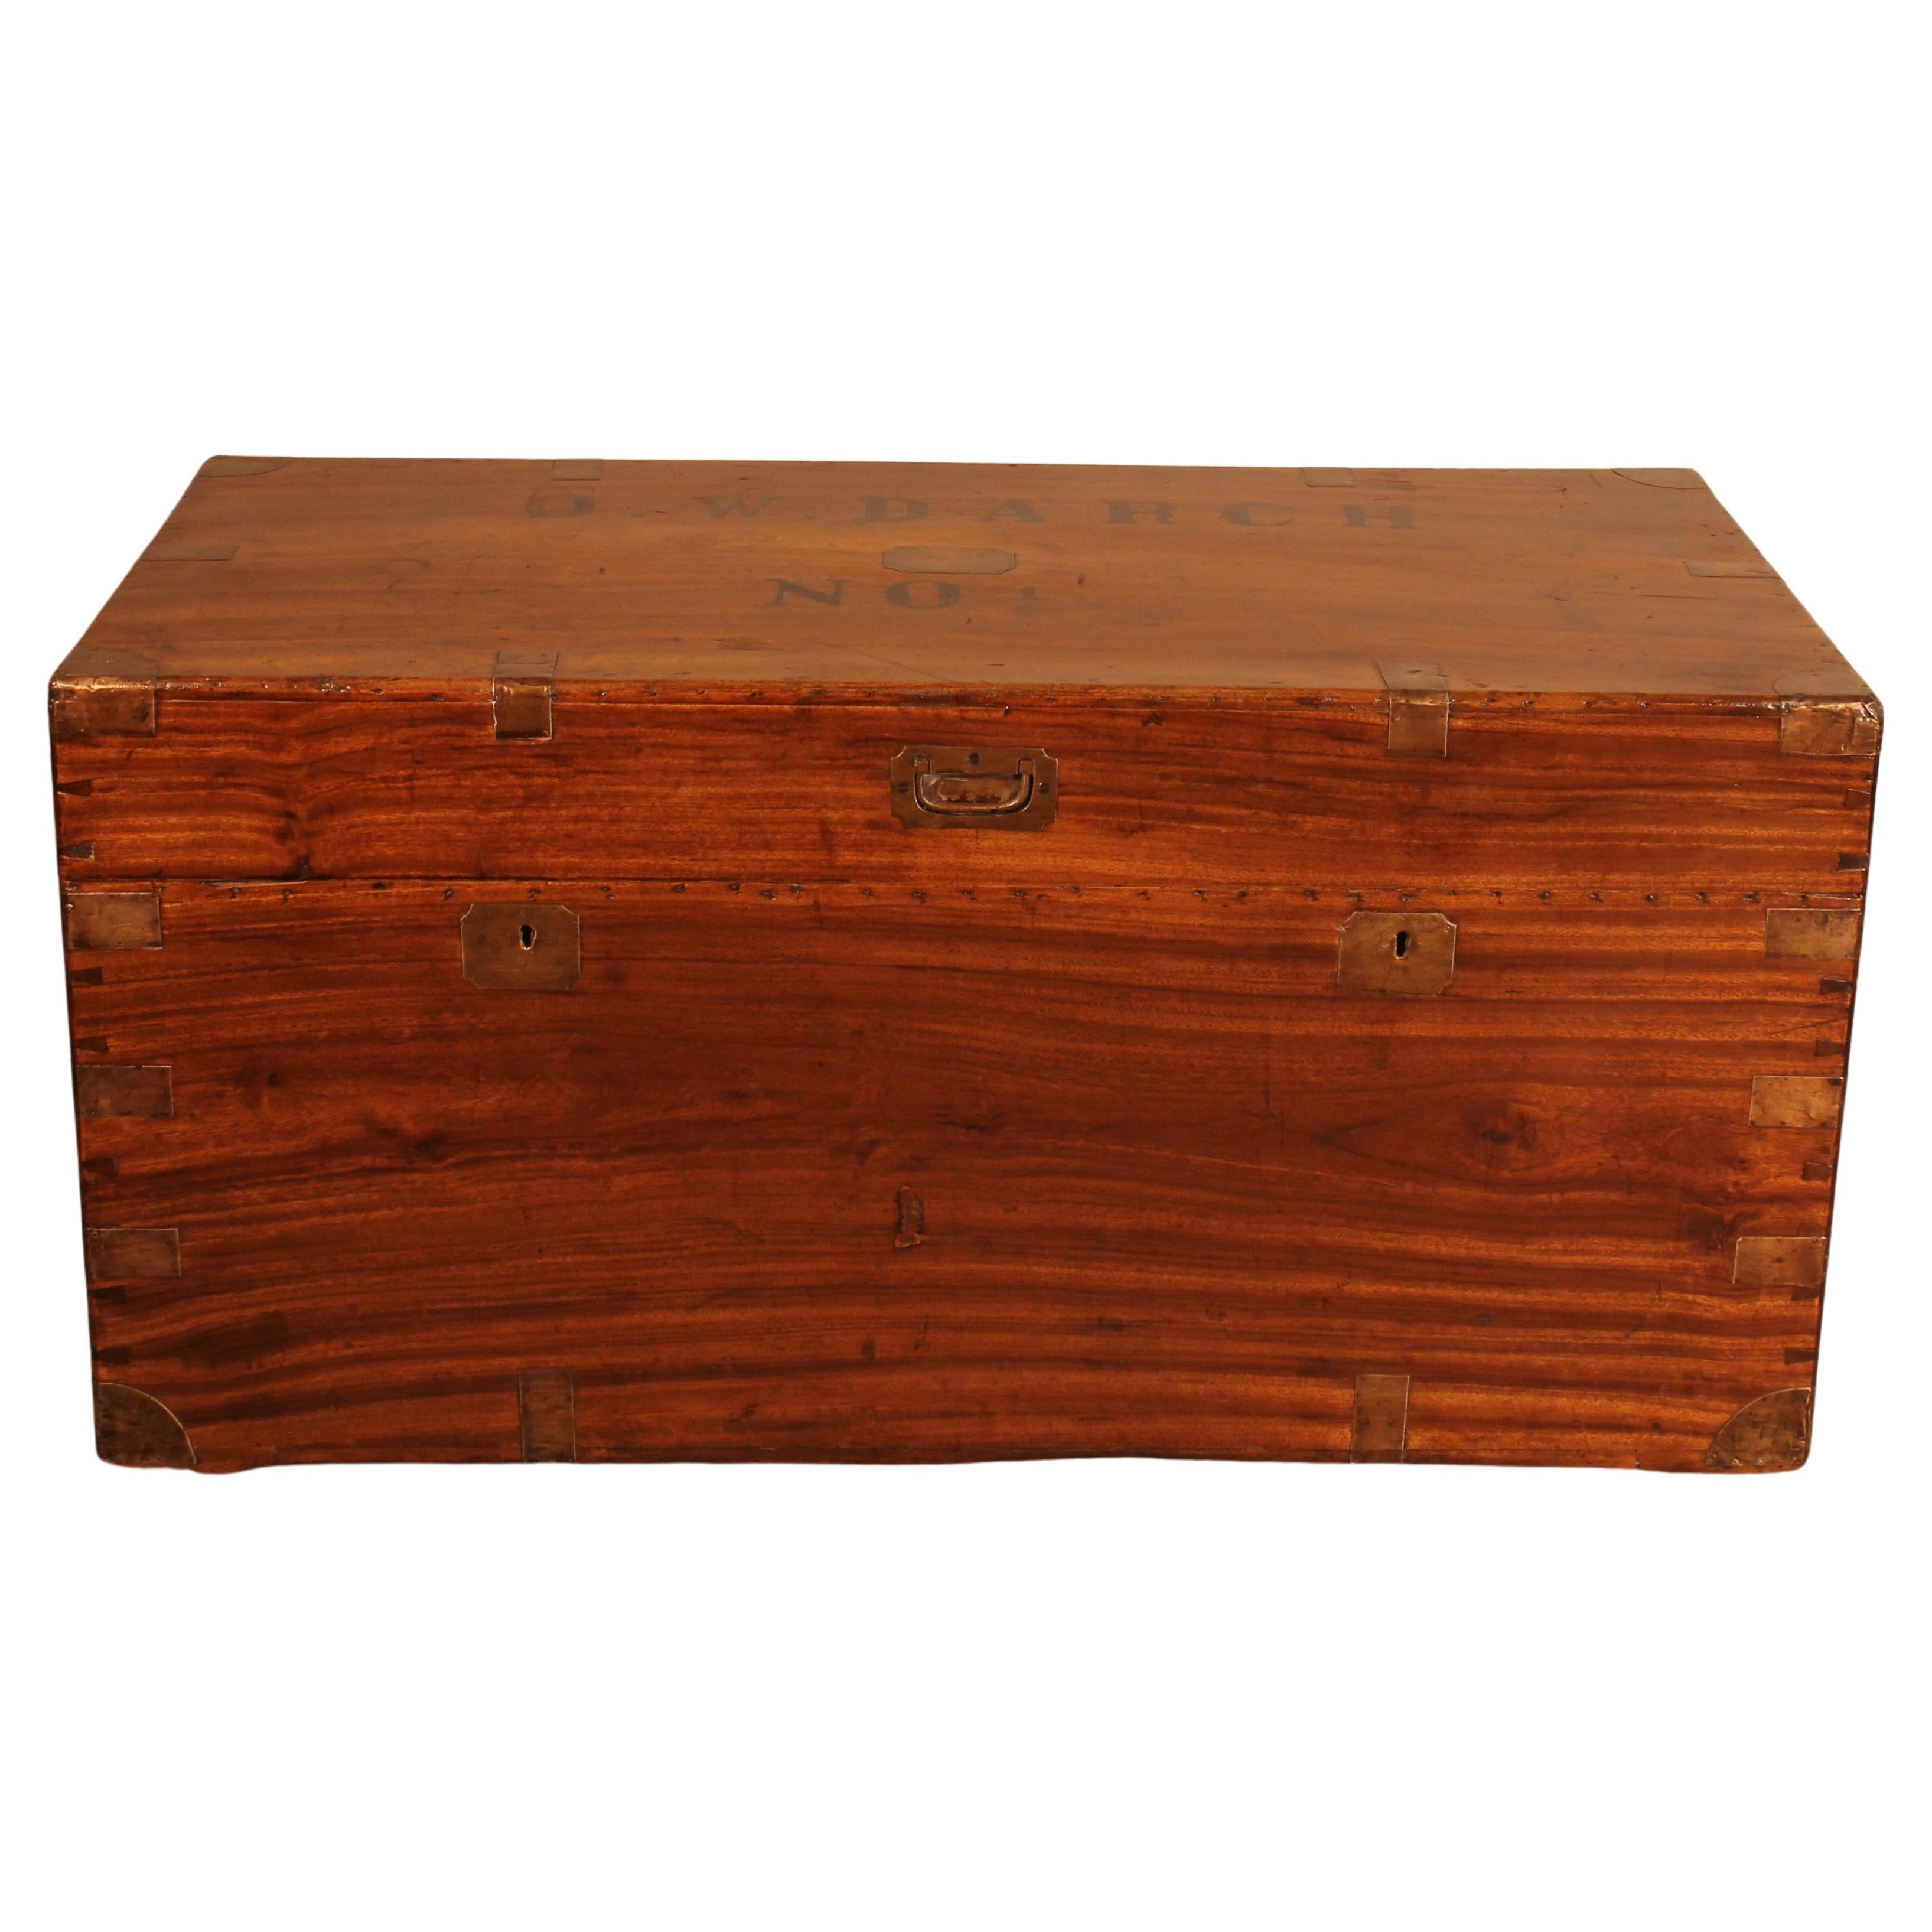 Large Campaign Chest of Captain 0.W Darch N ° 1 in Camphor Wood from 19th Ce